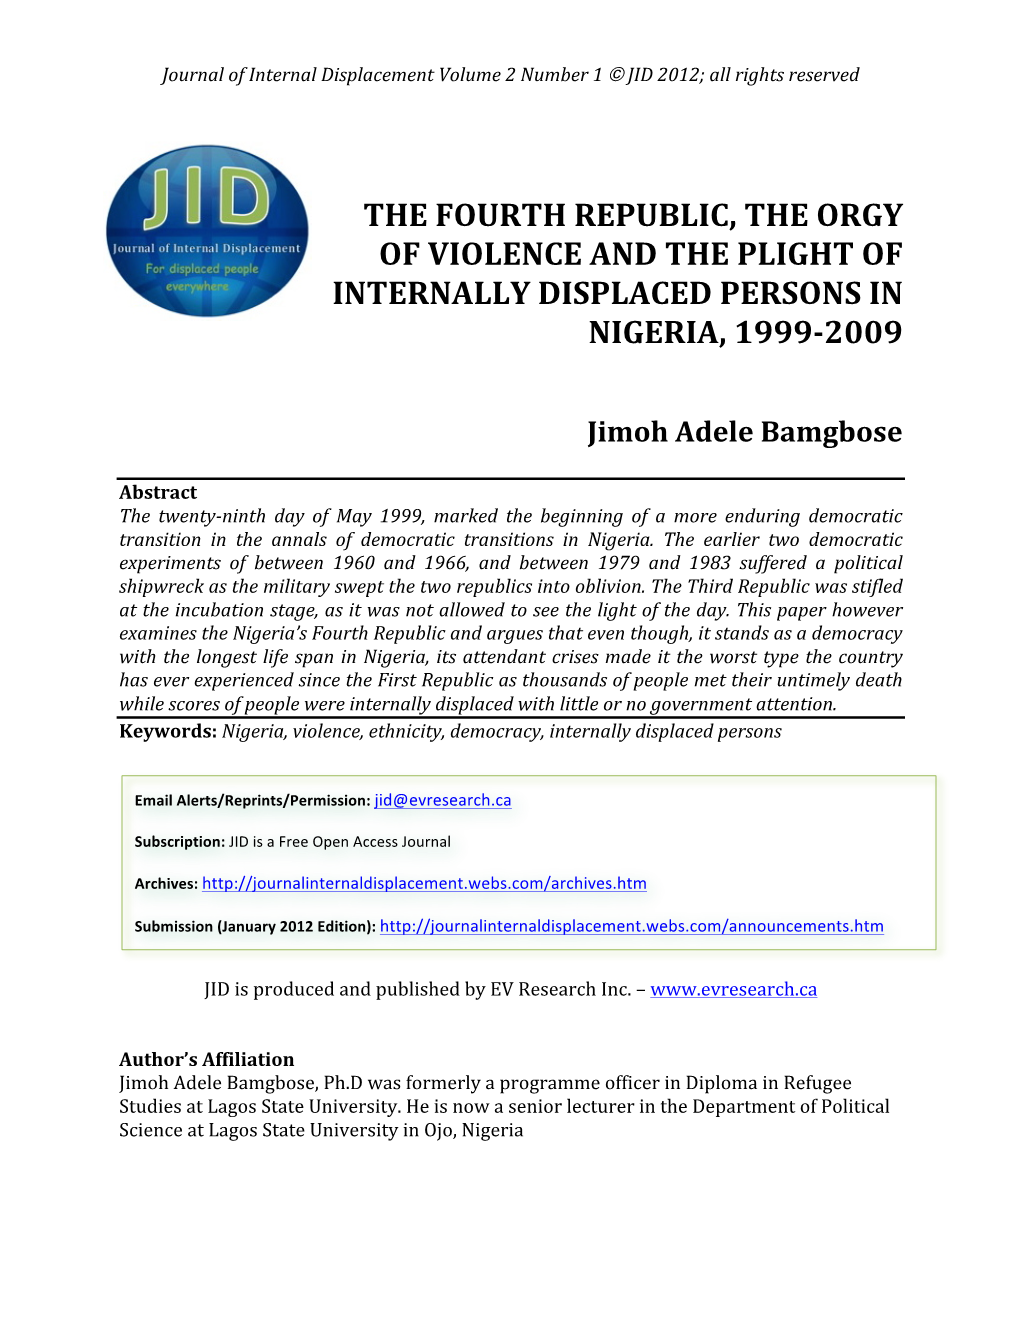 The Fourth Republic, the Orgy of Violence and the Plight of Internally Displaced Persons in Nigeria, 1999-2009